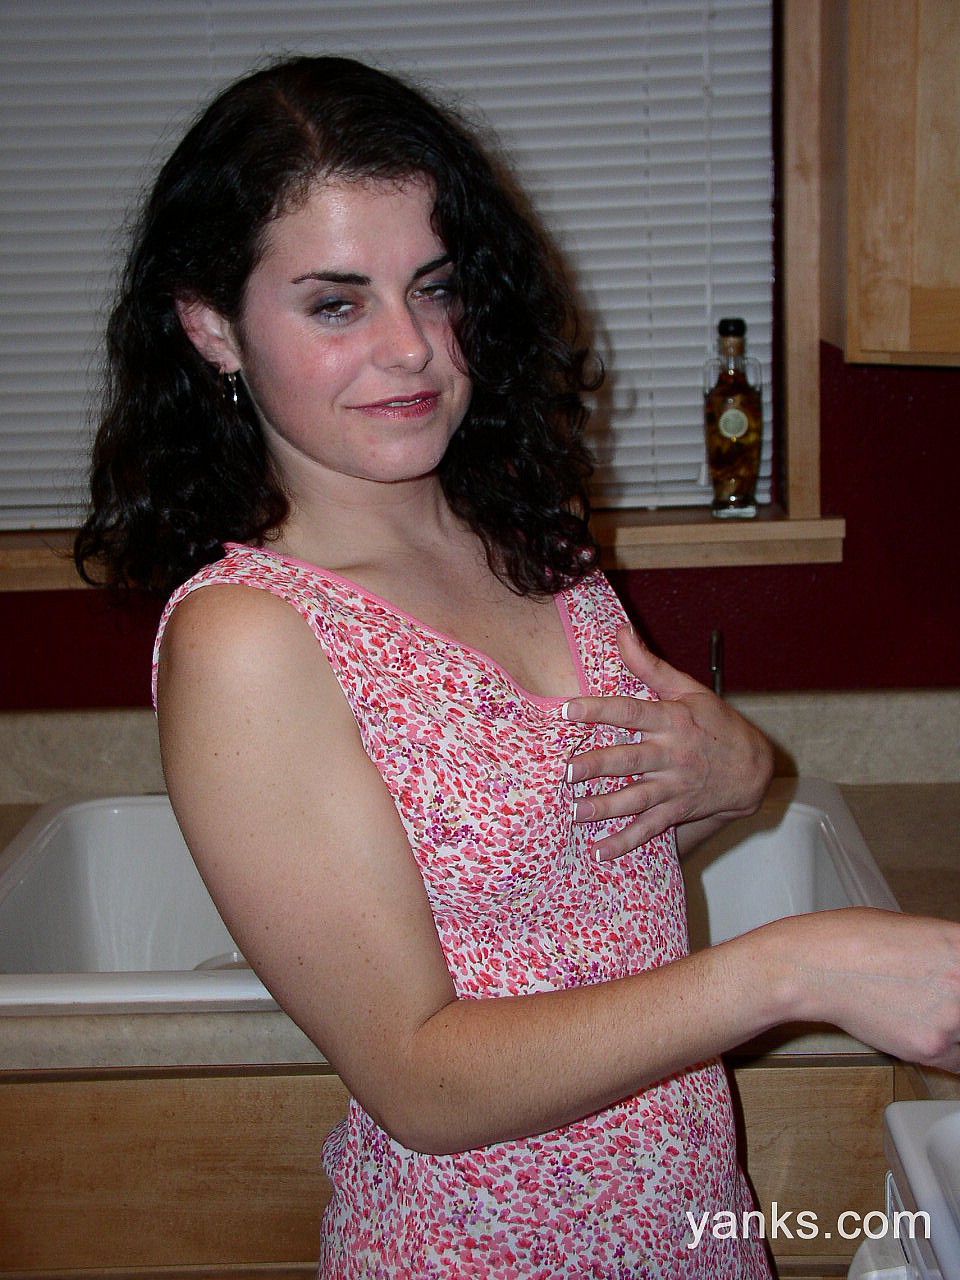 Sexy brunette babe Michelle poses in kitchen and fucks her cunt with carrot photo porno #427200618 | Yanks Pics, Michelle, Amateur, porno mobile